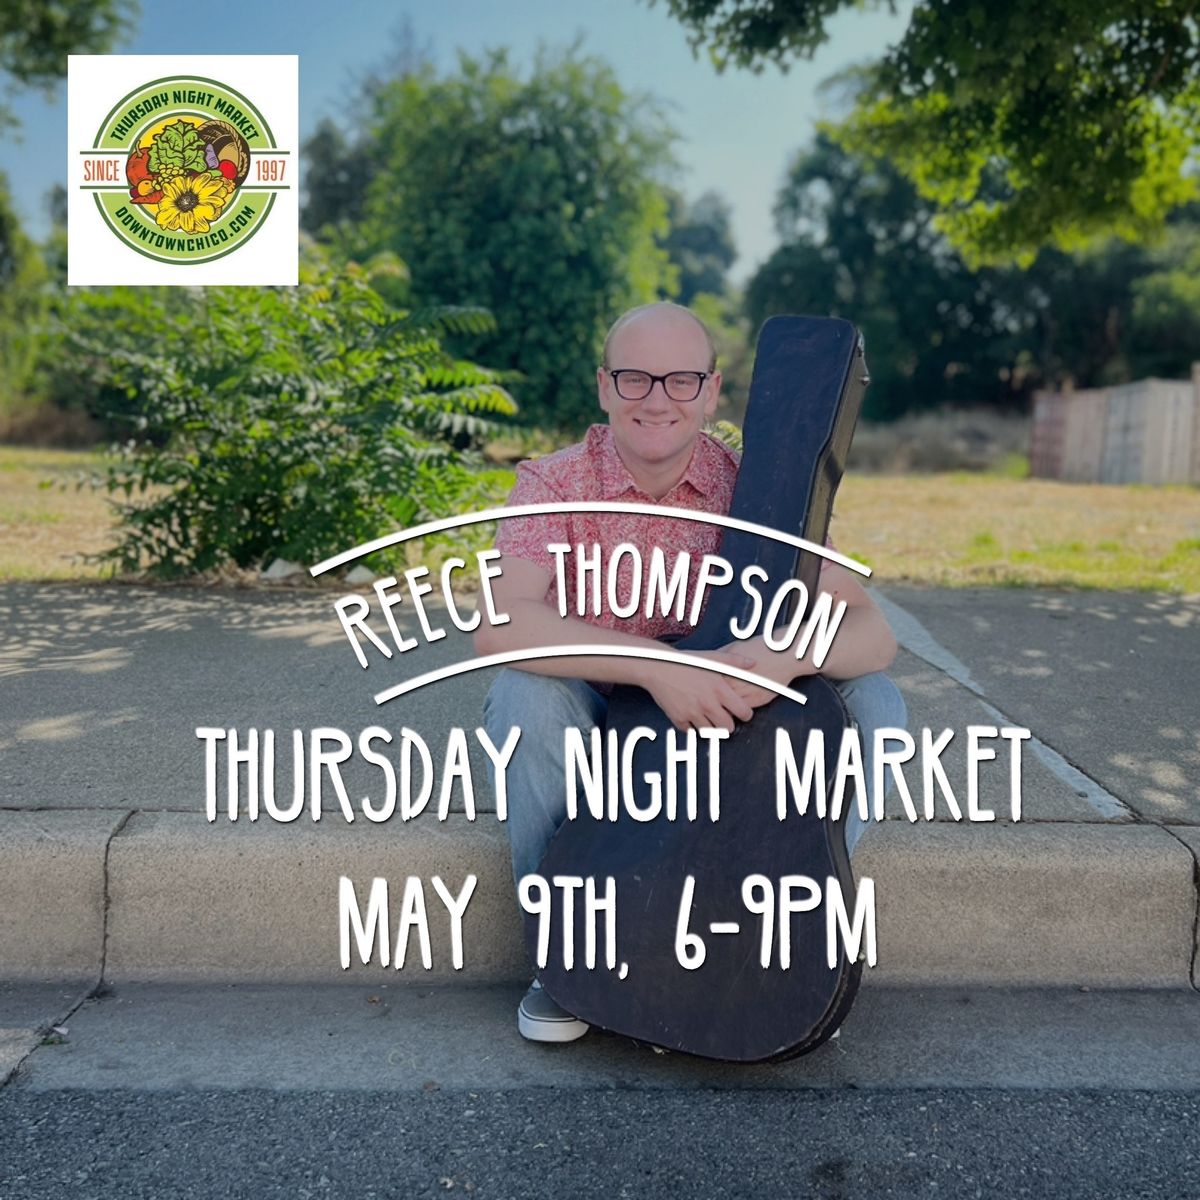 Thursday Night Market ft. Live Music by Reece Thompson 